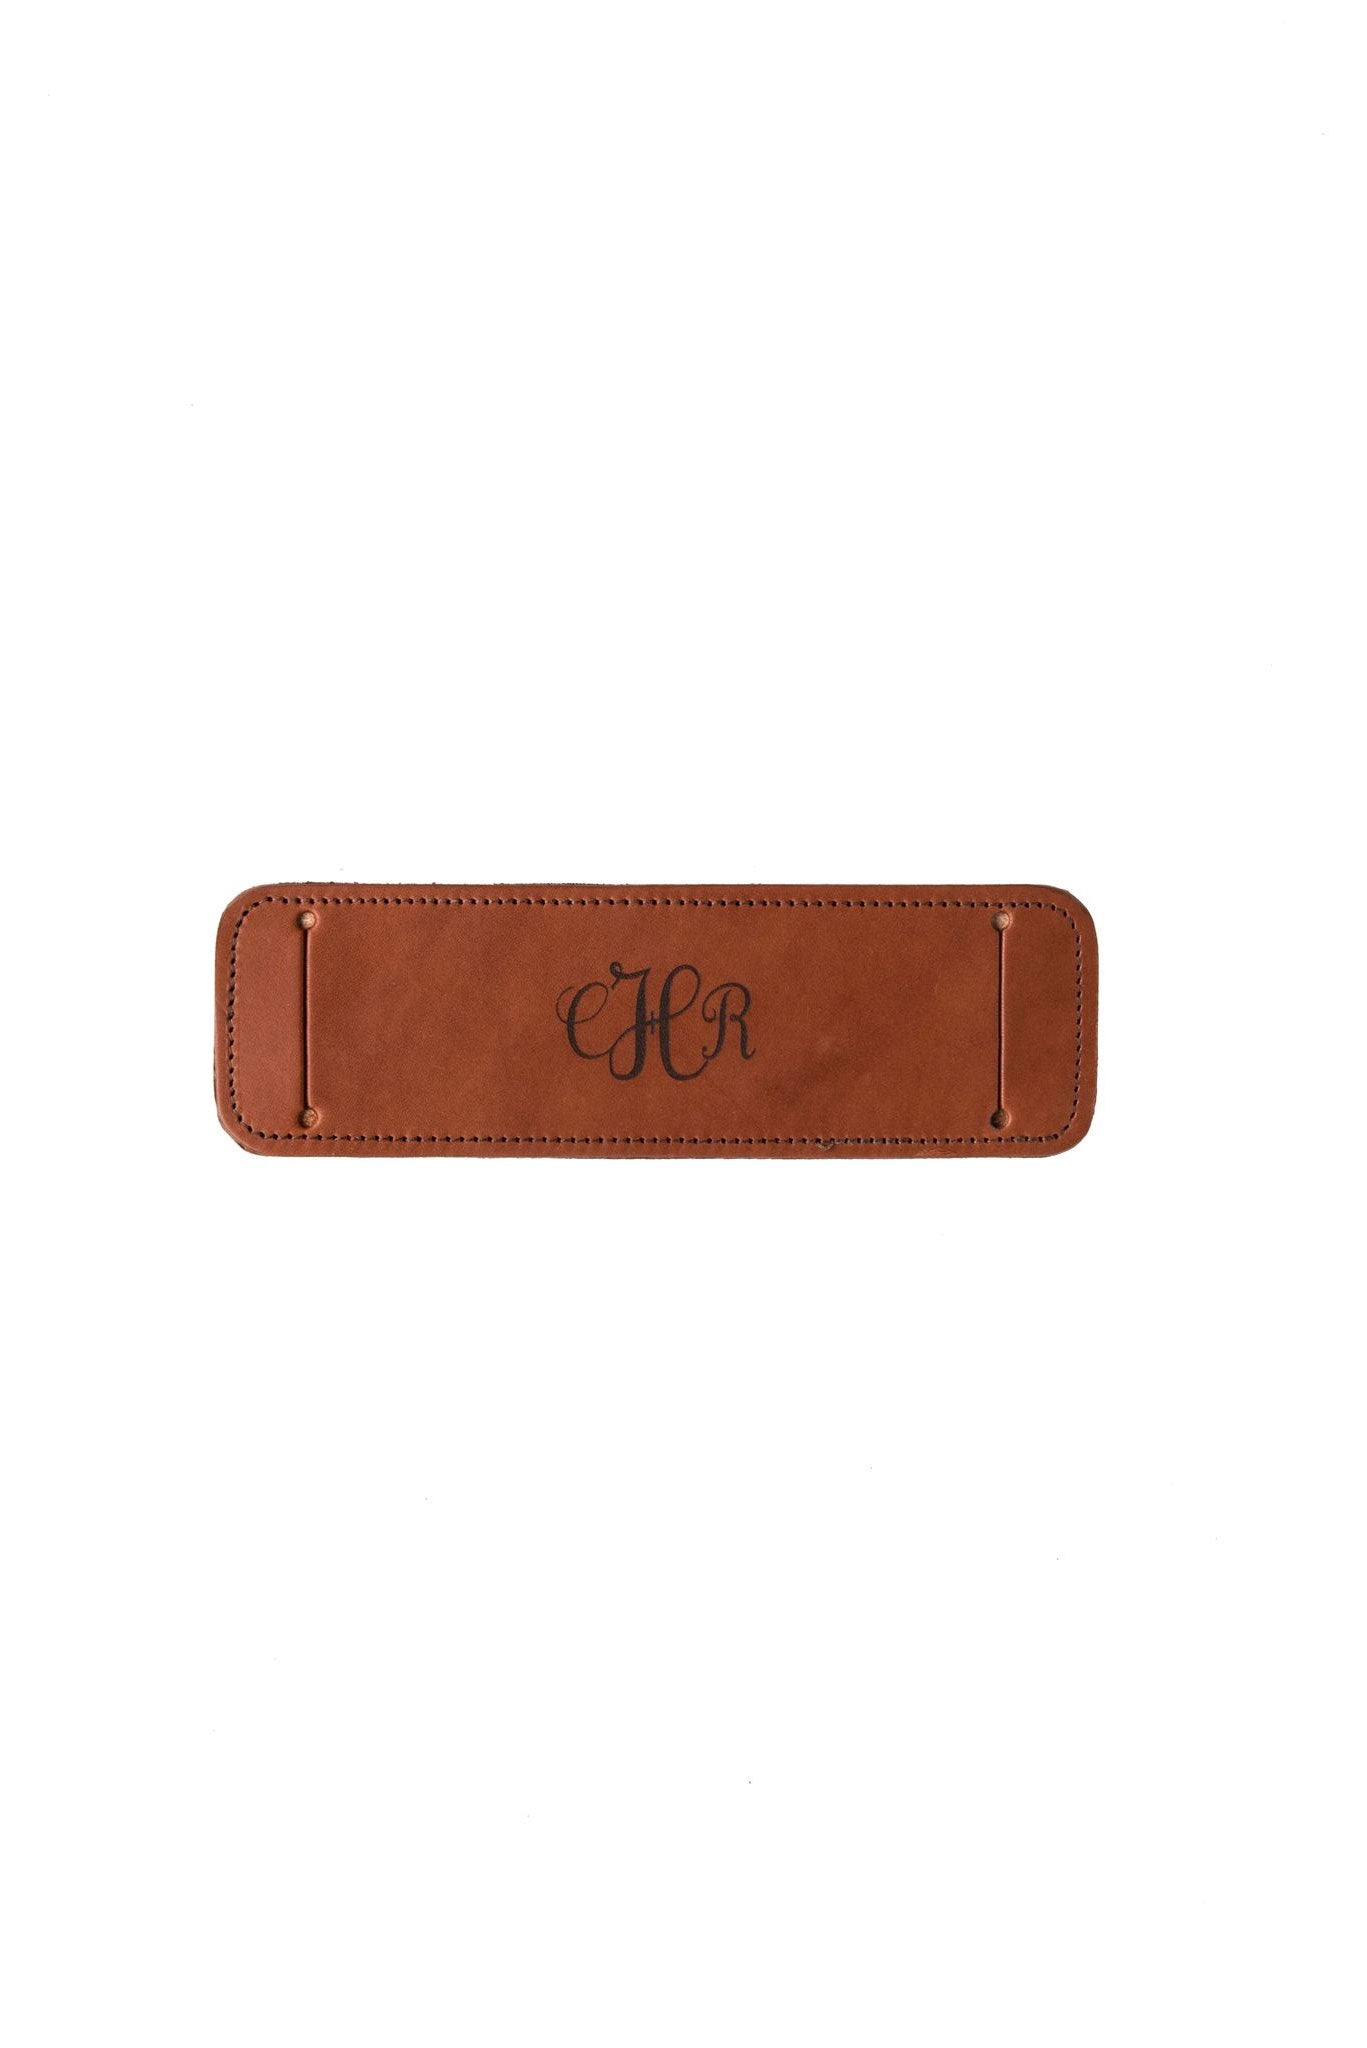 FOTO | Leather Shoulder Pad - a cognac brown genuine leather camera strap shoulder pad that can be personalized with a monogram, text or business logo making it the perfect personalized gift.